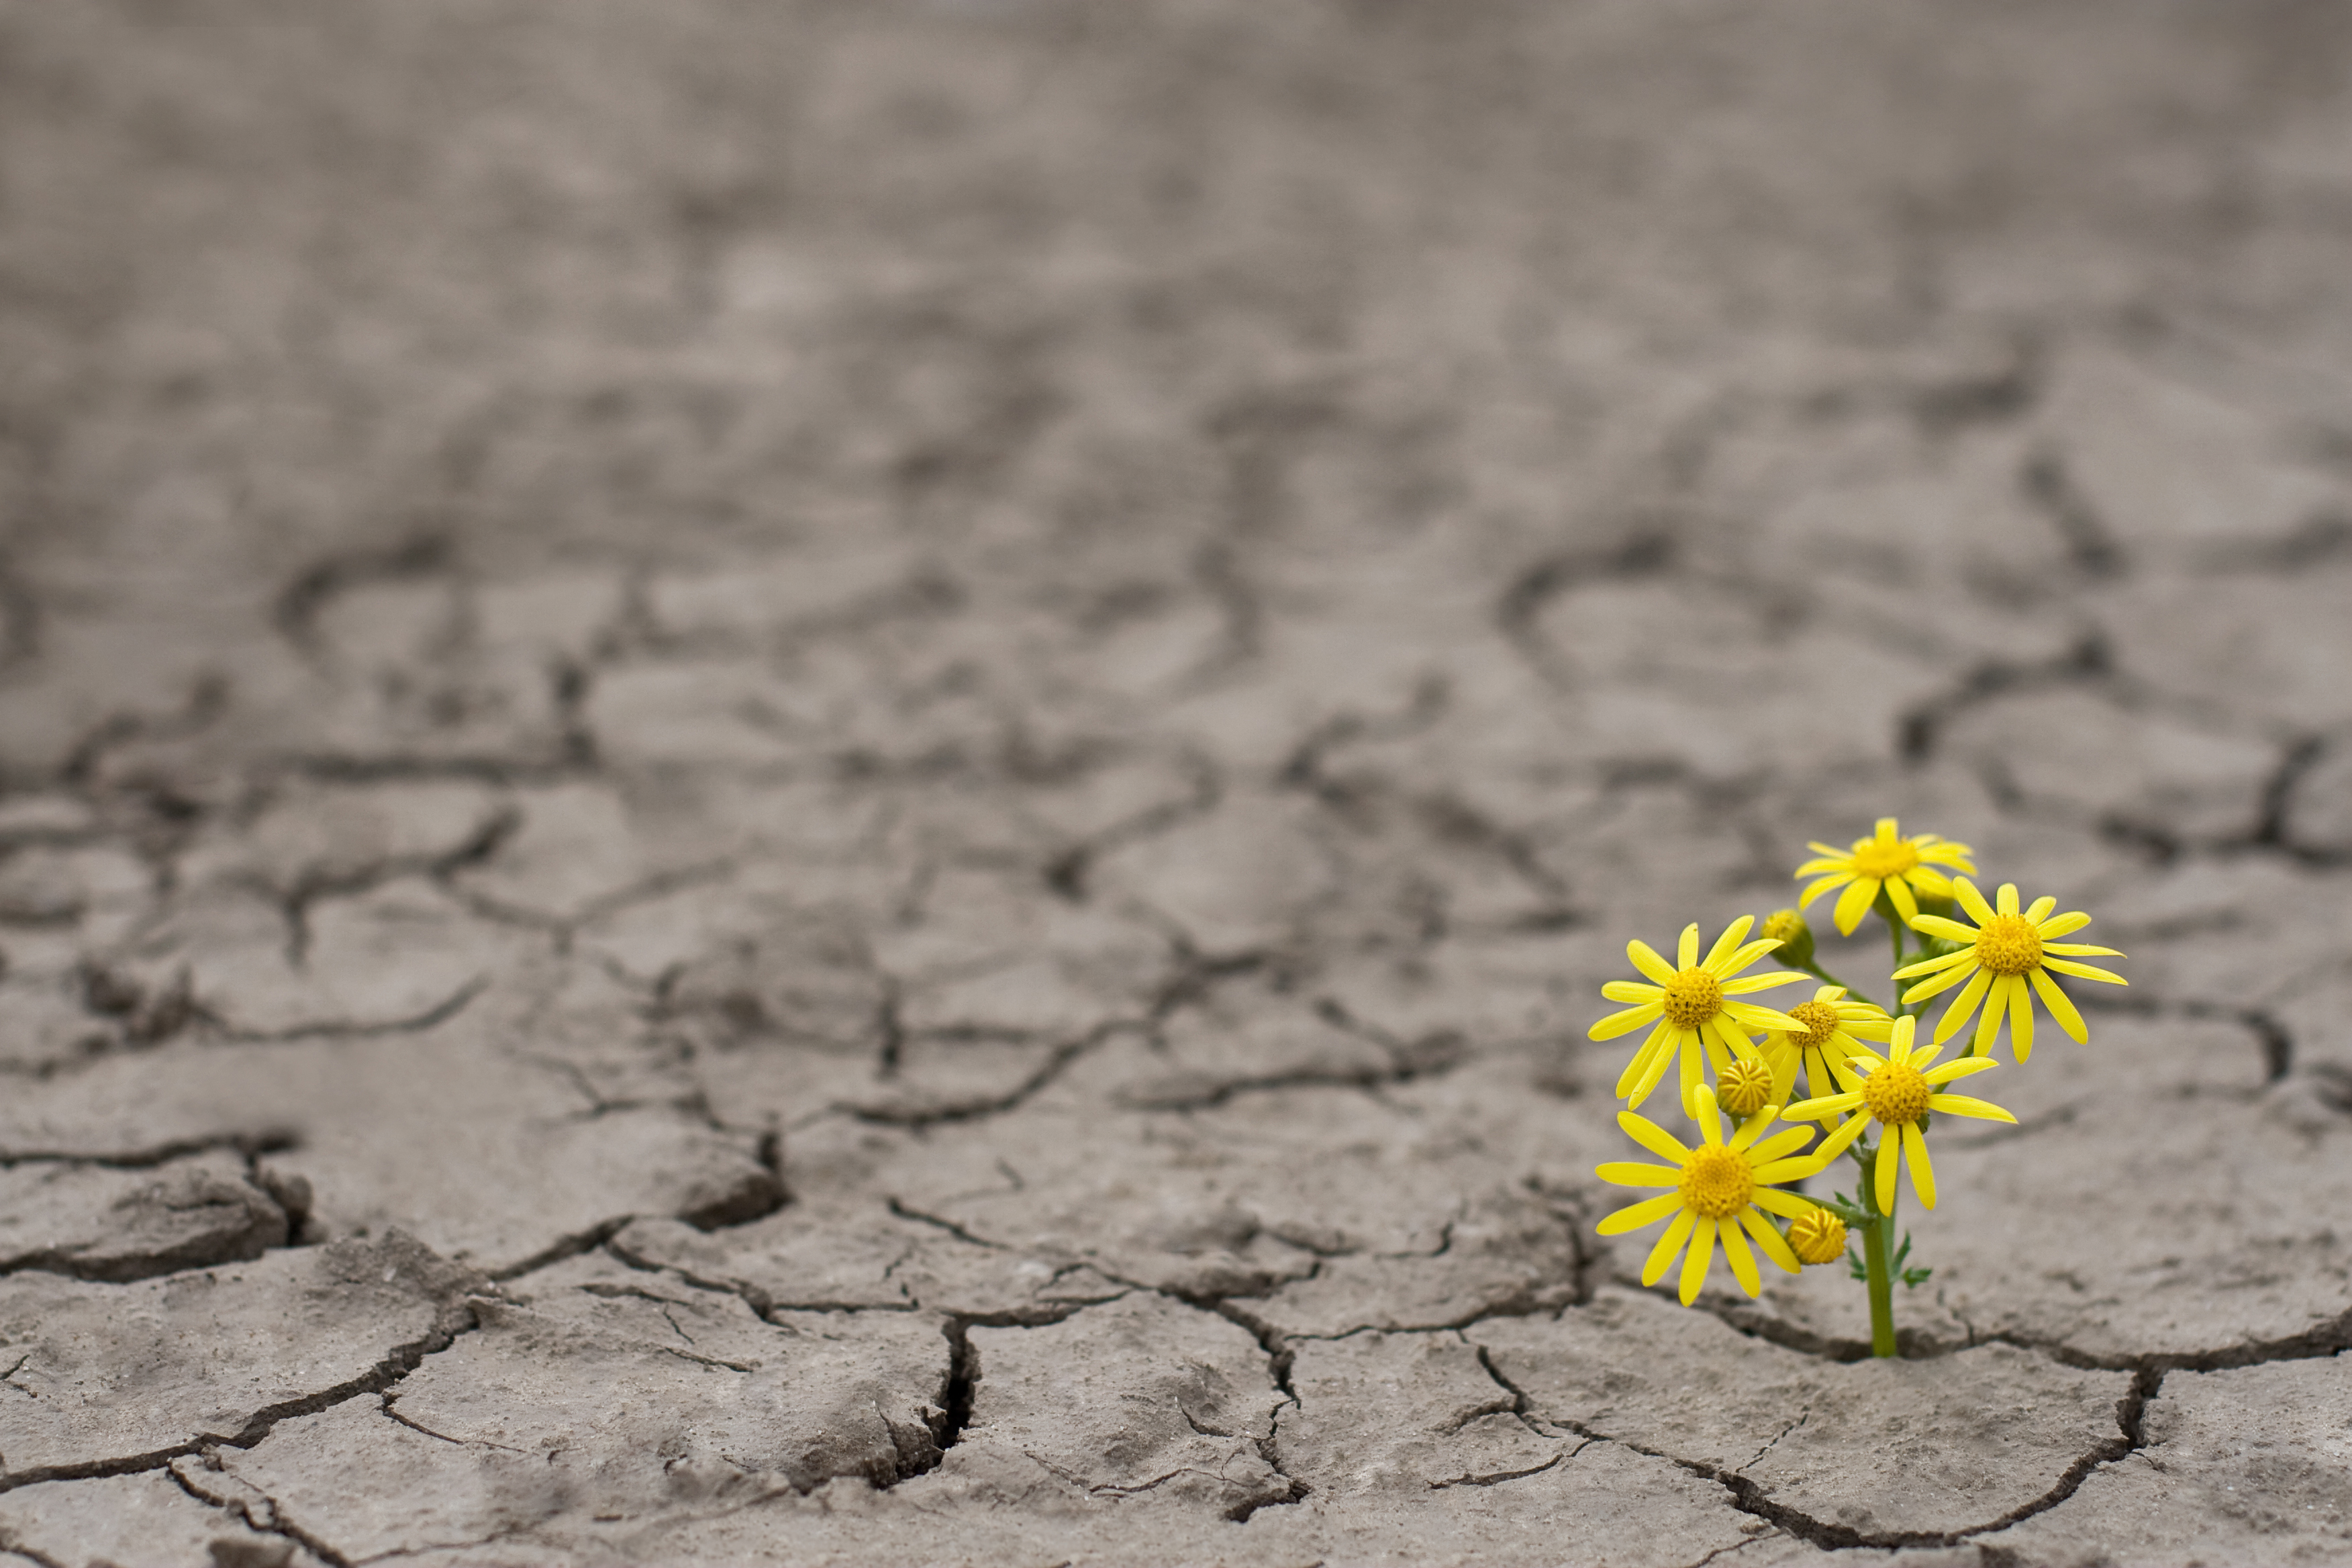 Horizontal side view of a single yellow flower growing on dry cracked soil;  Fundraising for green startups